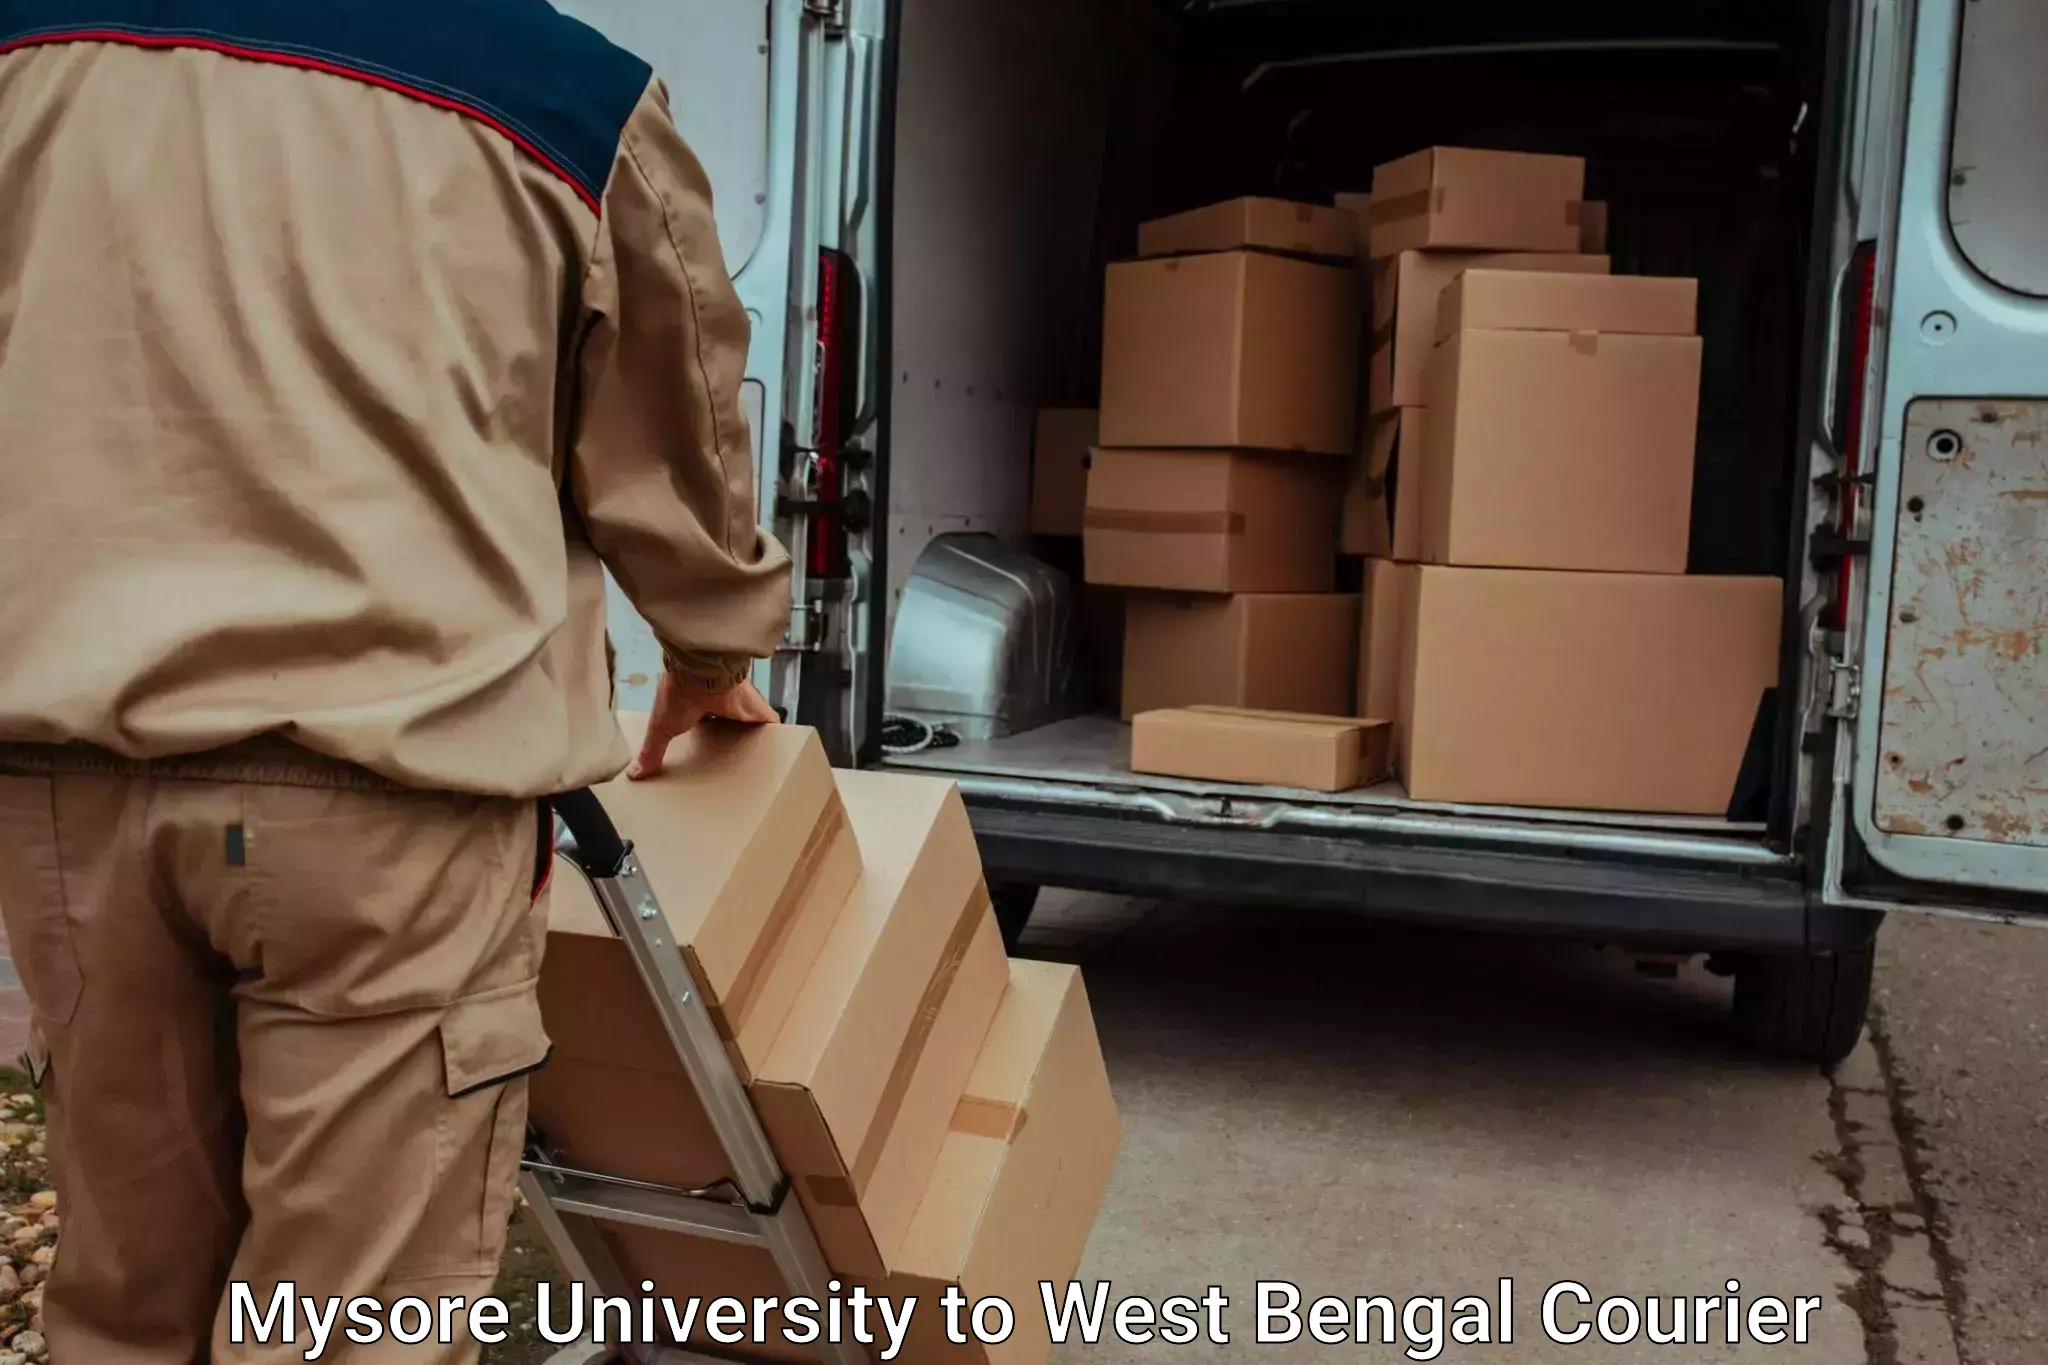 Comprehensive moving services in Mysore University to Raghunathpur